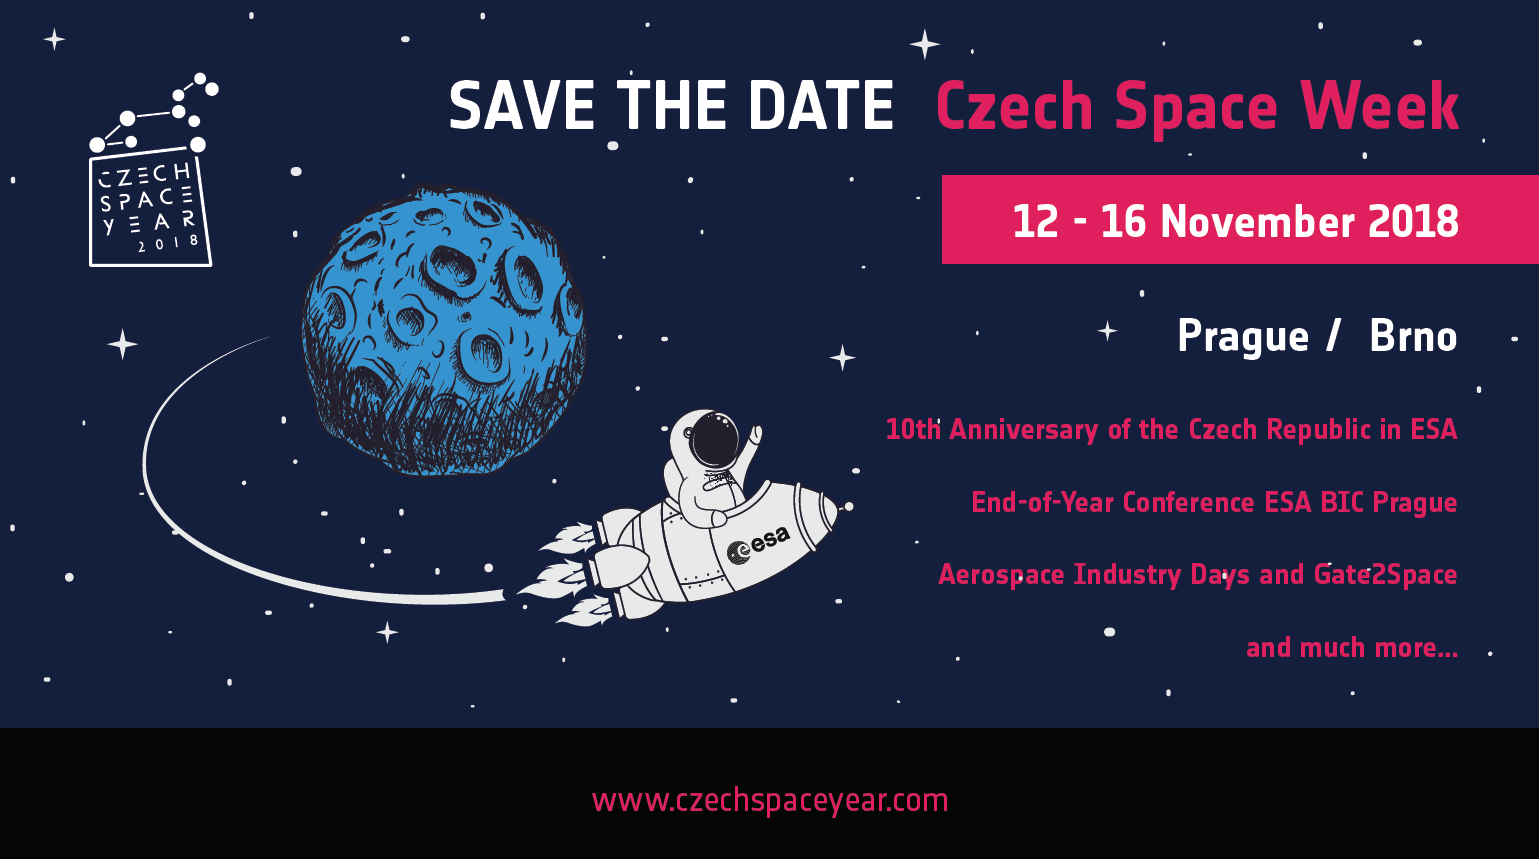 Save the date - Czech space week - Czech space year 2018